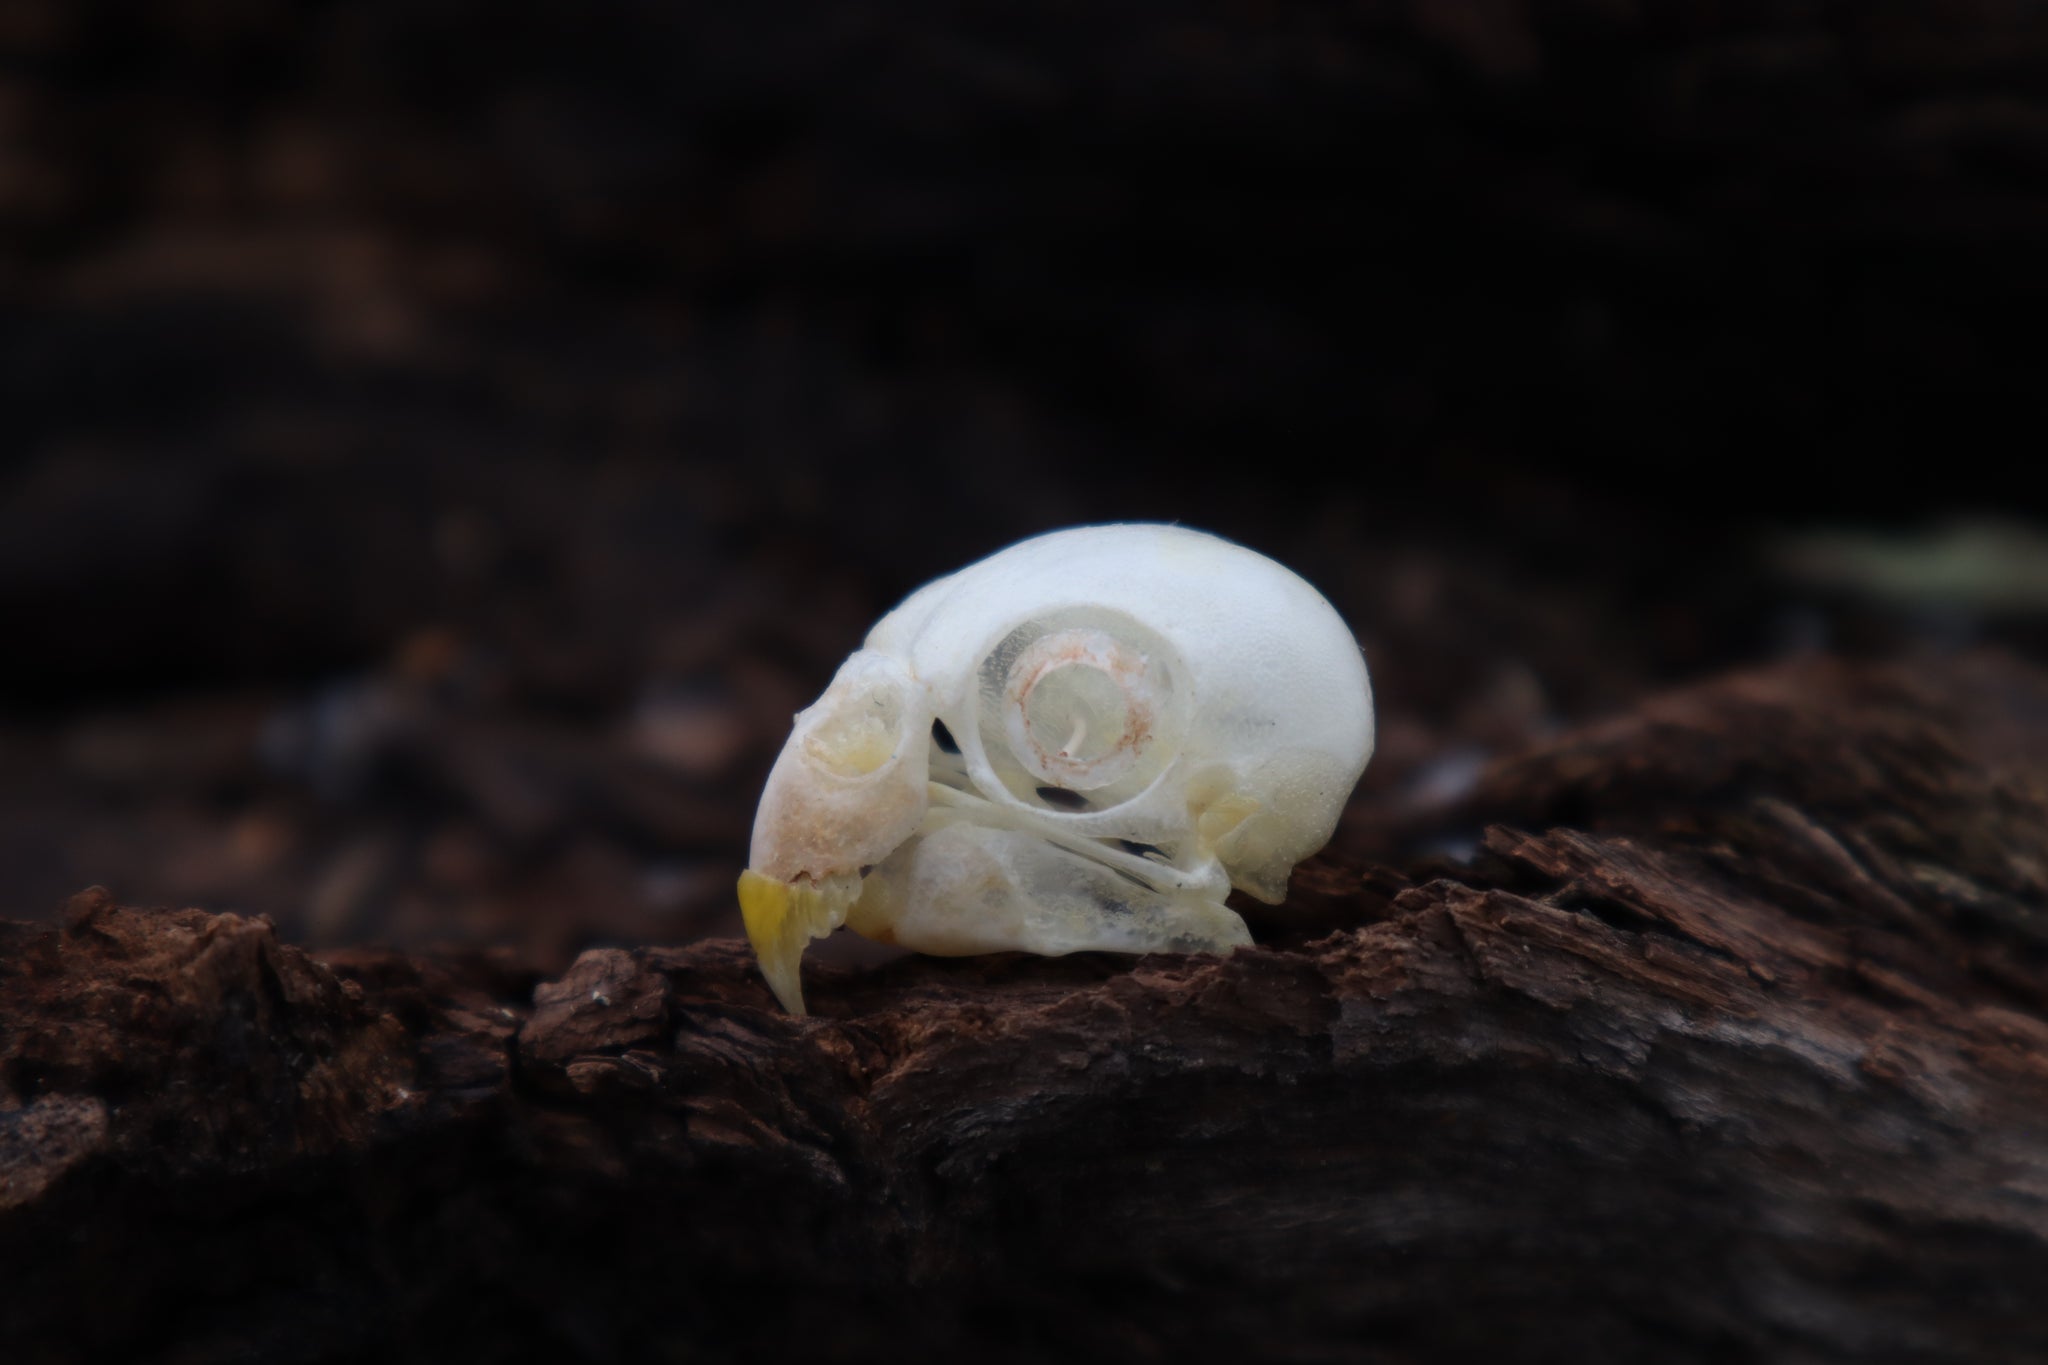 Parakeet Skull with Sclerotic Rings